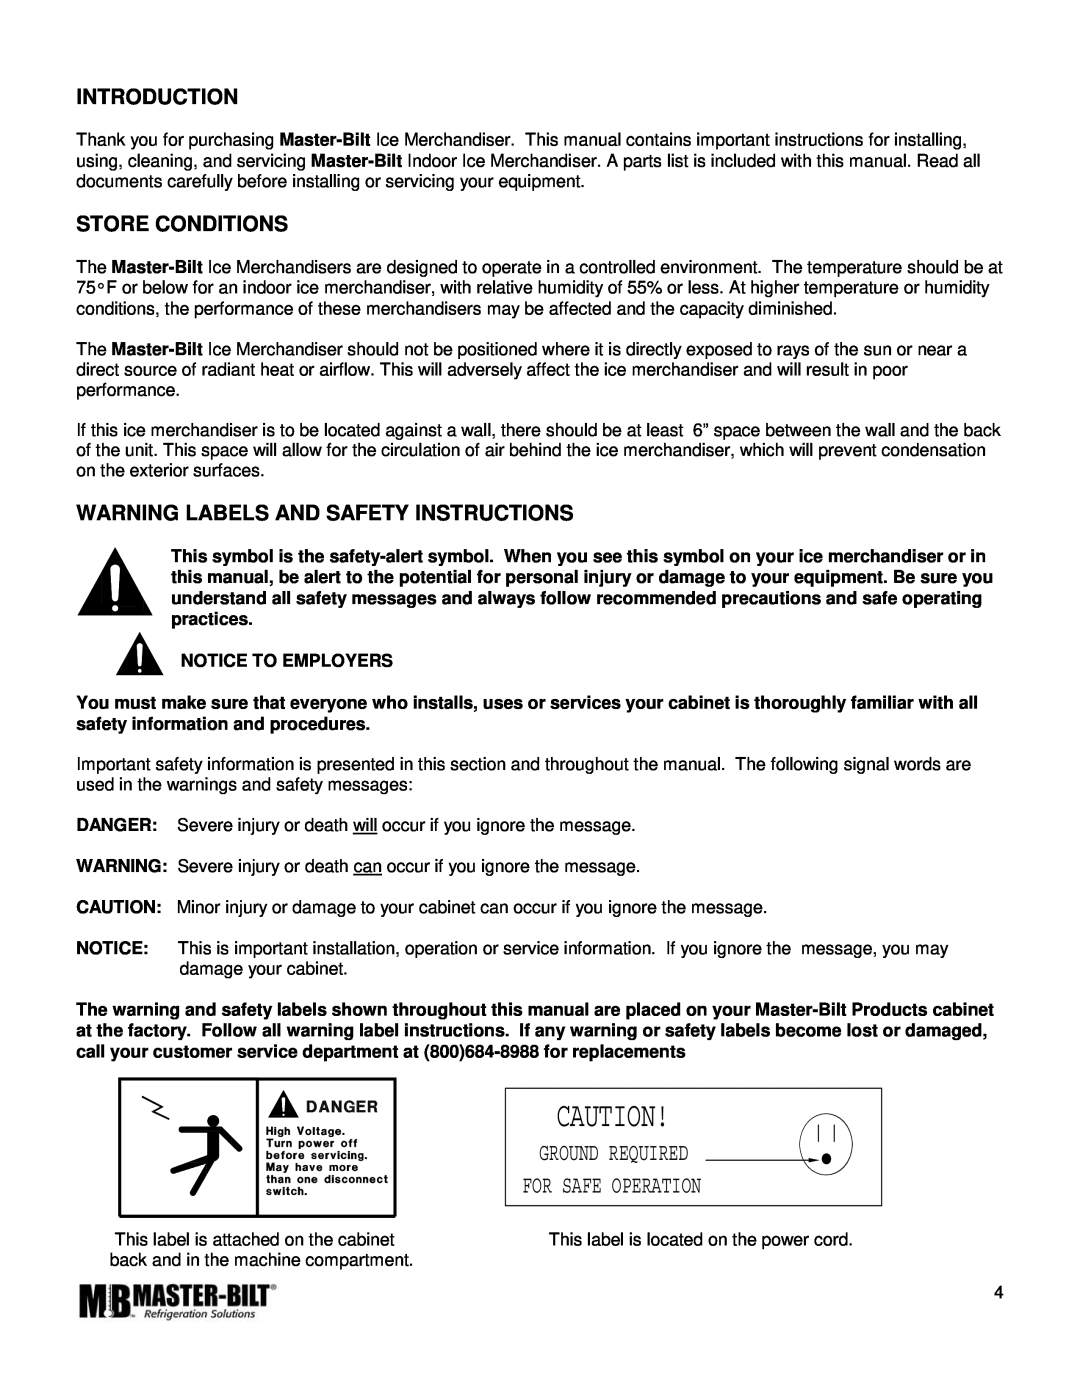 Master Bilt IM-23GB manual Introduction, Store Conditions, Warning Labels And Safety Instructions 